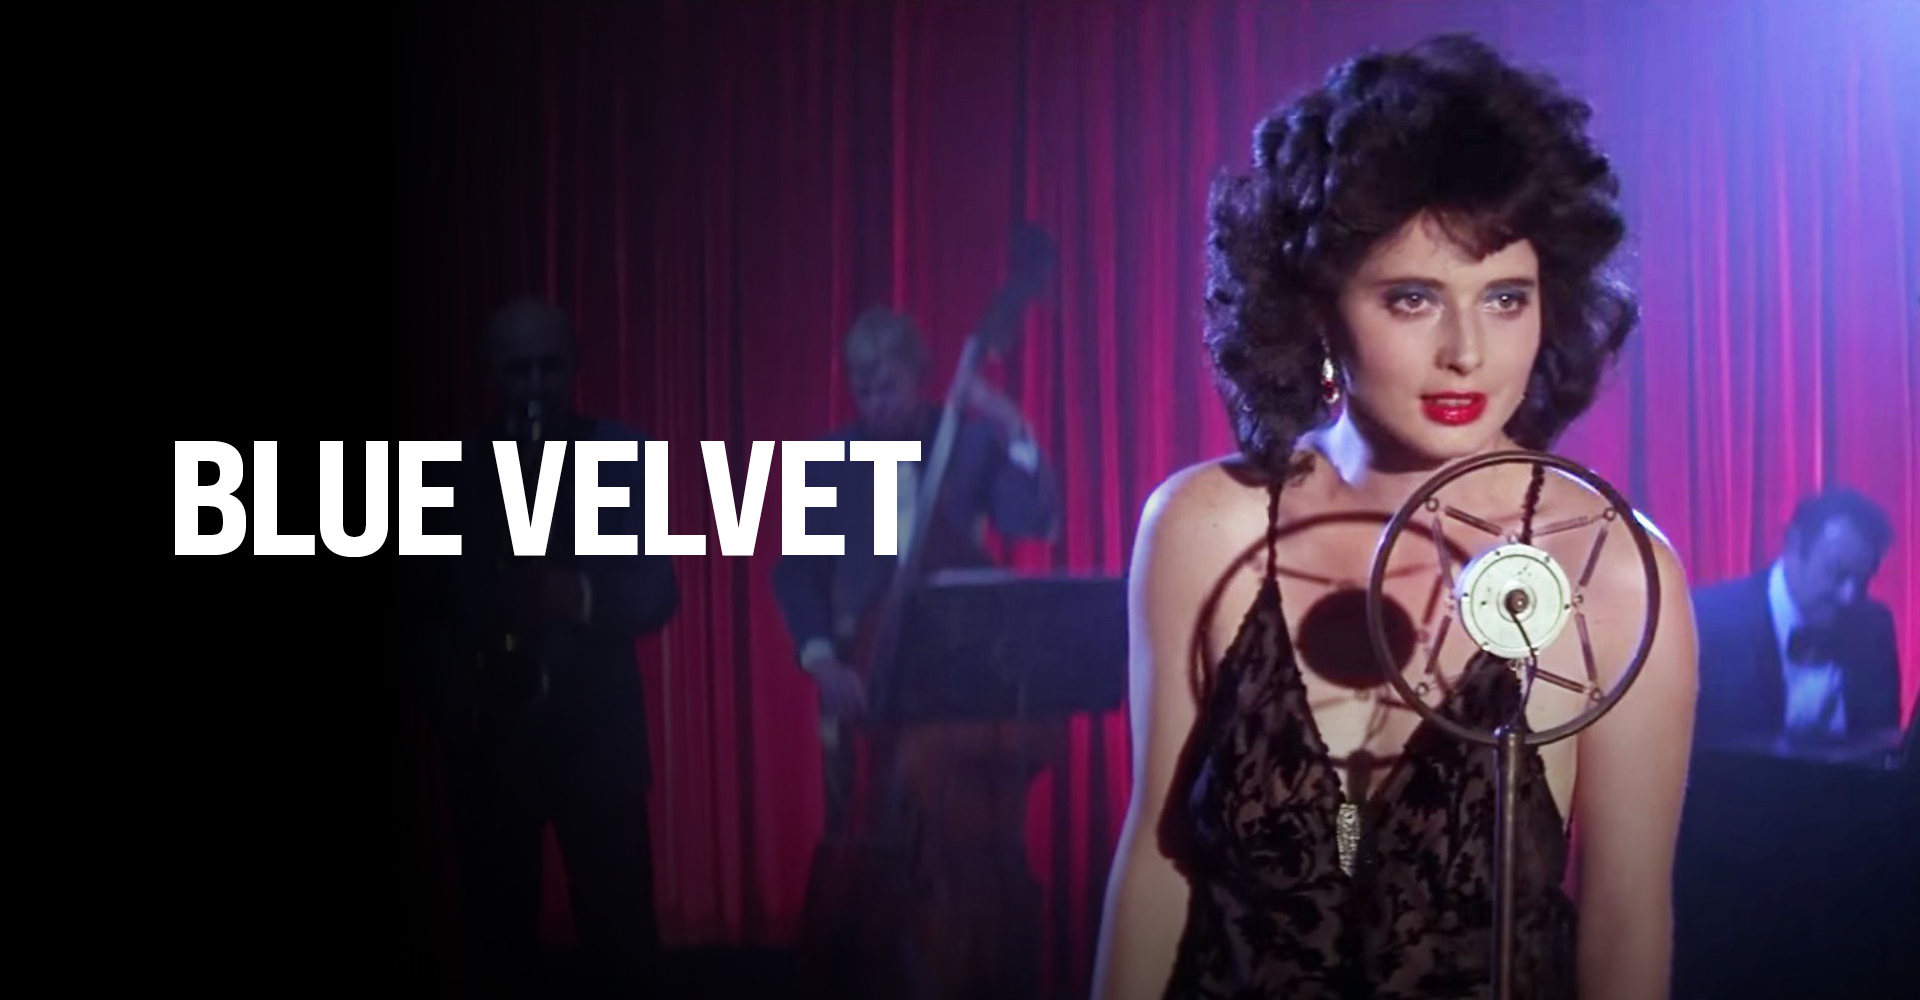 43-facts-about-the-movie-blue-velvet